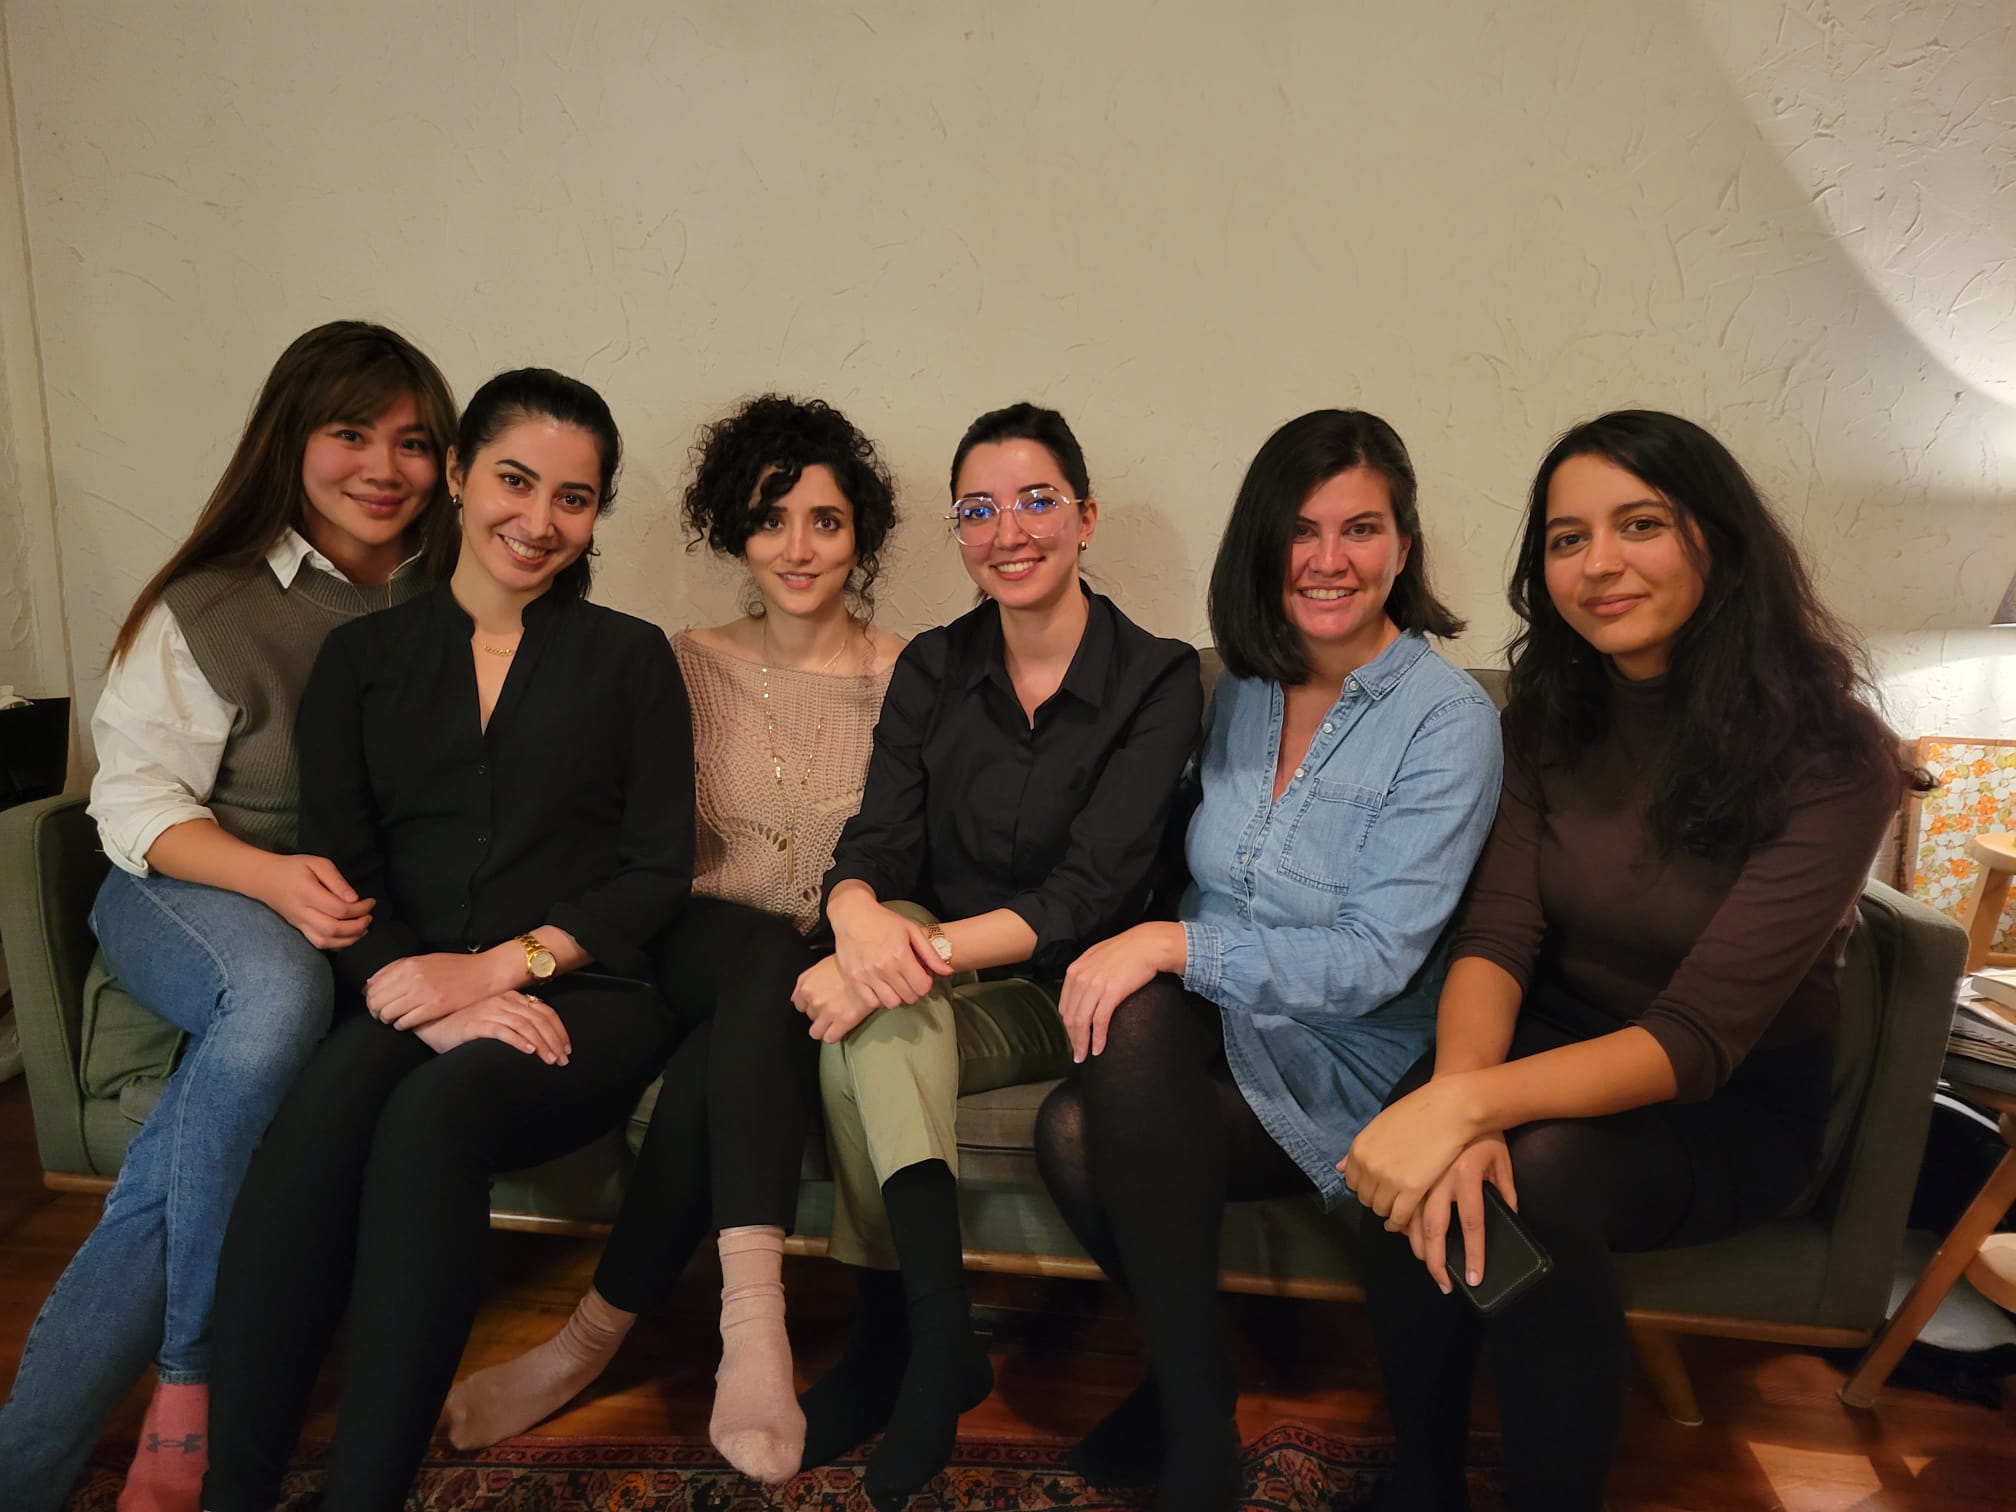 Six women sitting next to each other on a couch